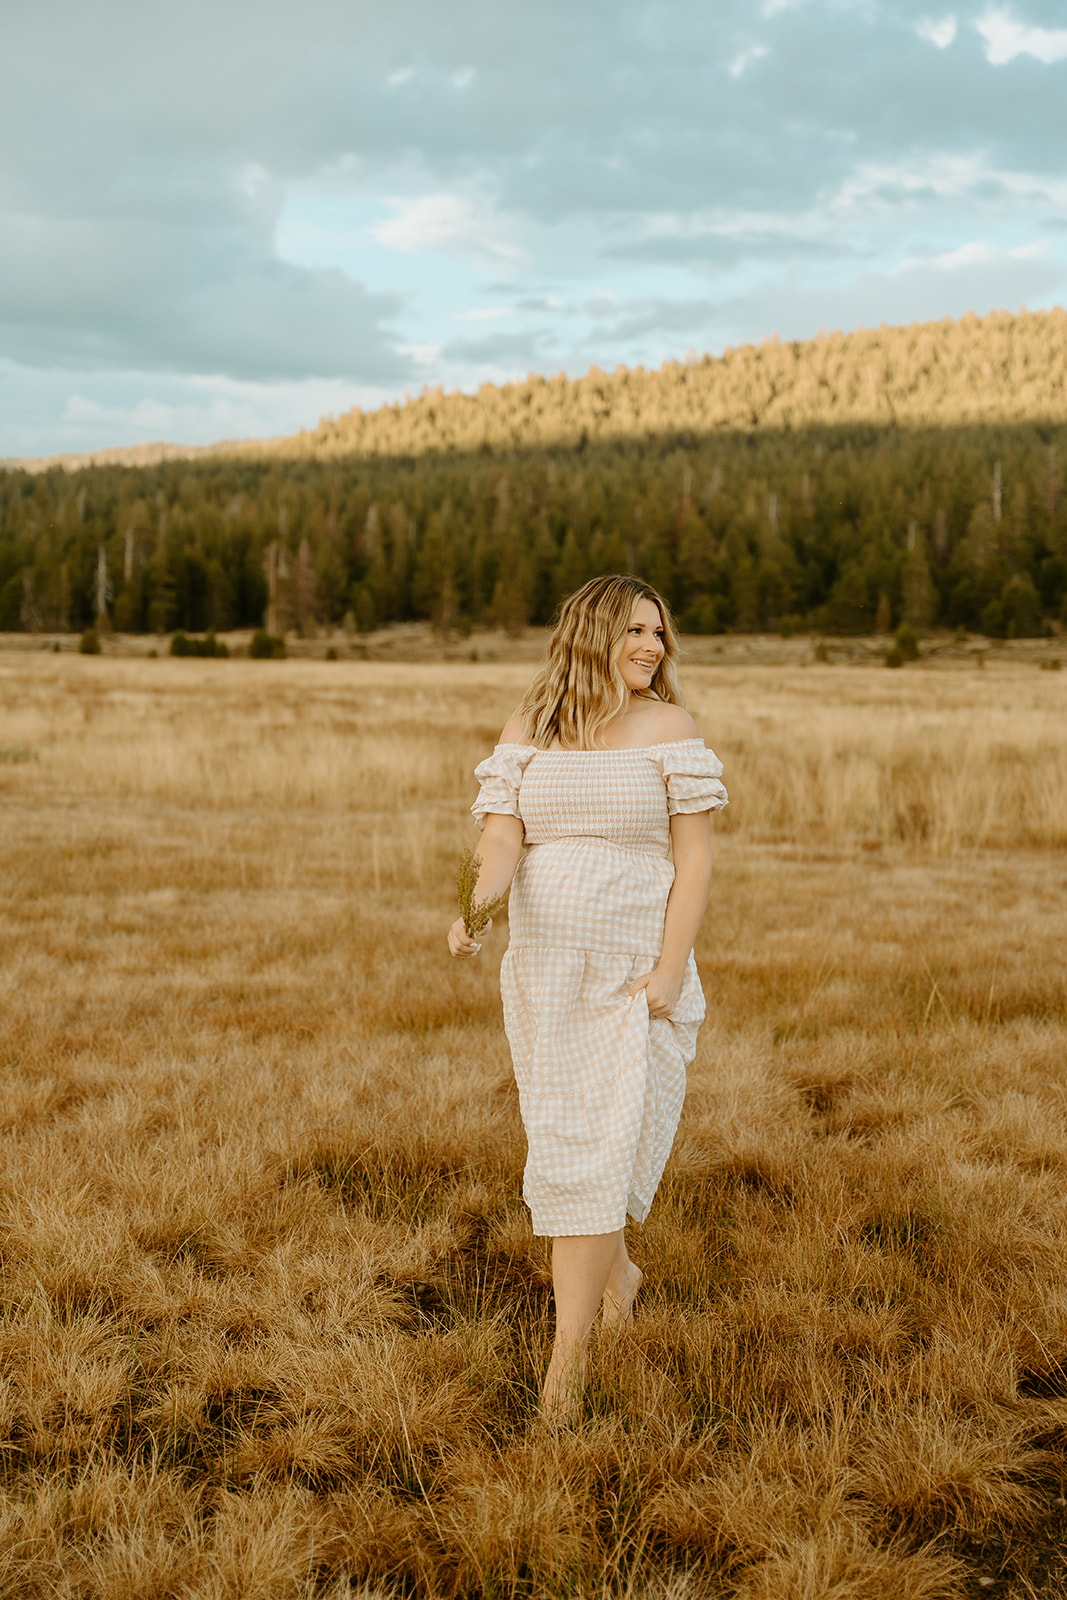 a mom holding flowers in a whimsical artistic blurred maternity photos taken in hope valley california.